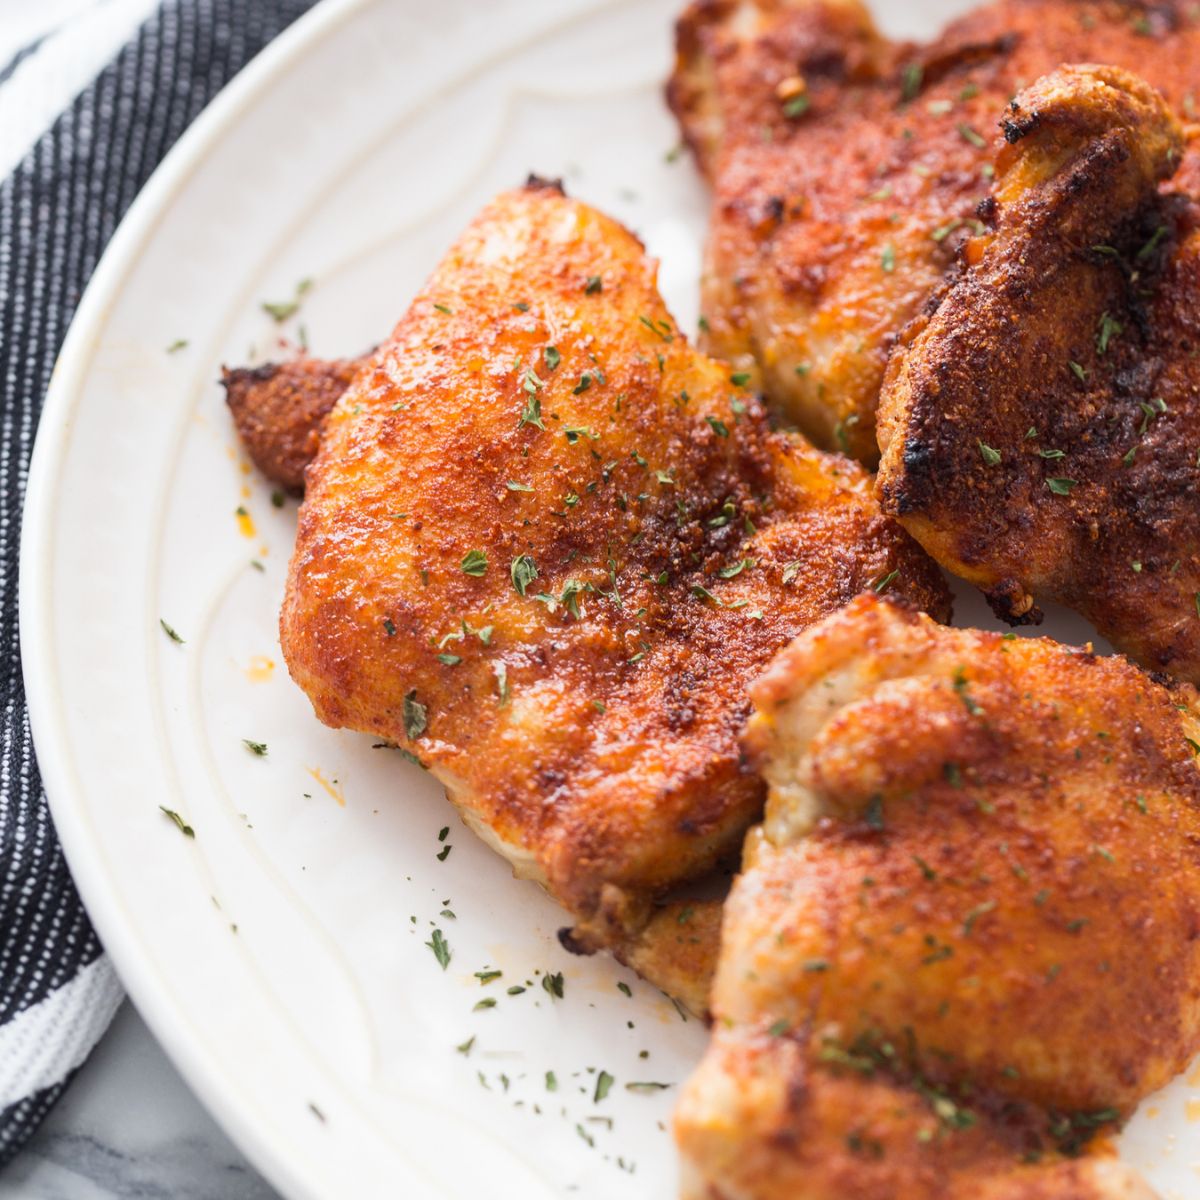 A plate of Boneless Skinless Air Fryer Chicken Thighs with fresh and dried herbs and spices.